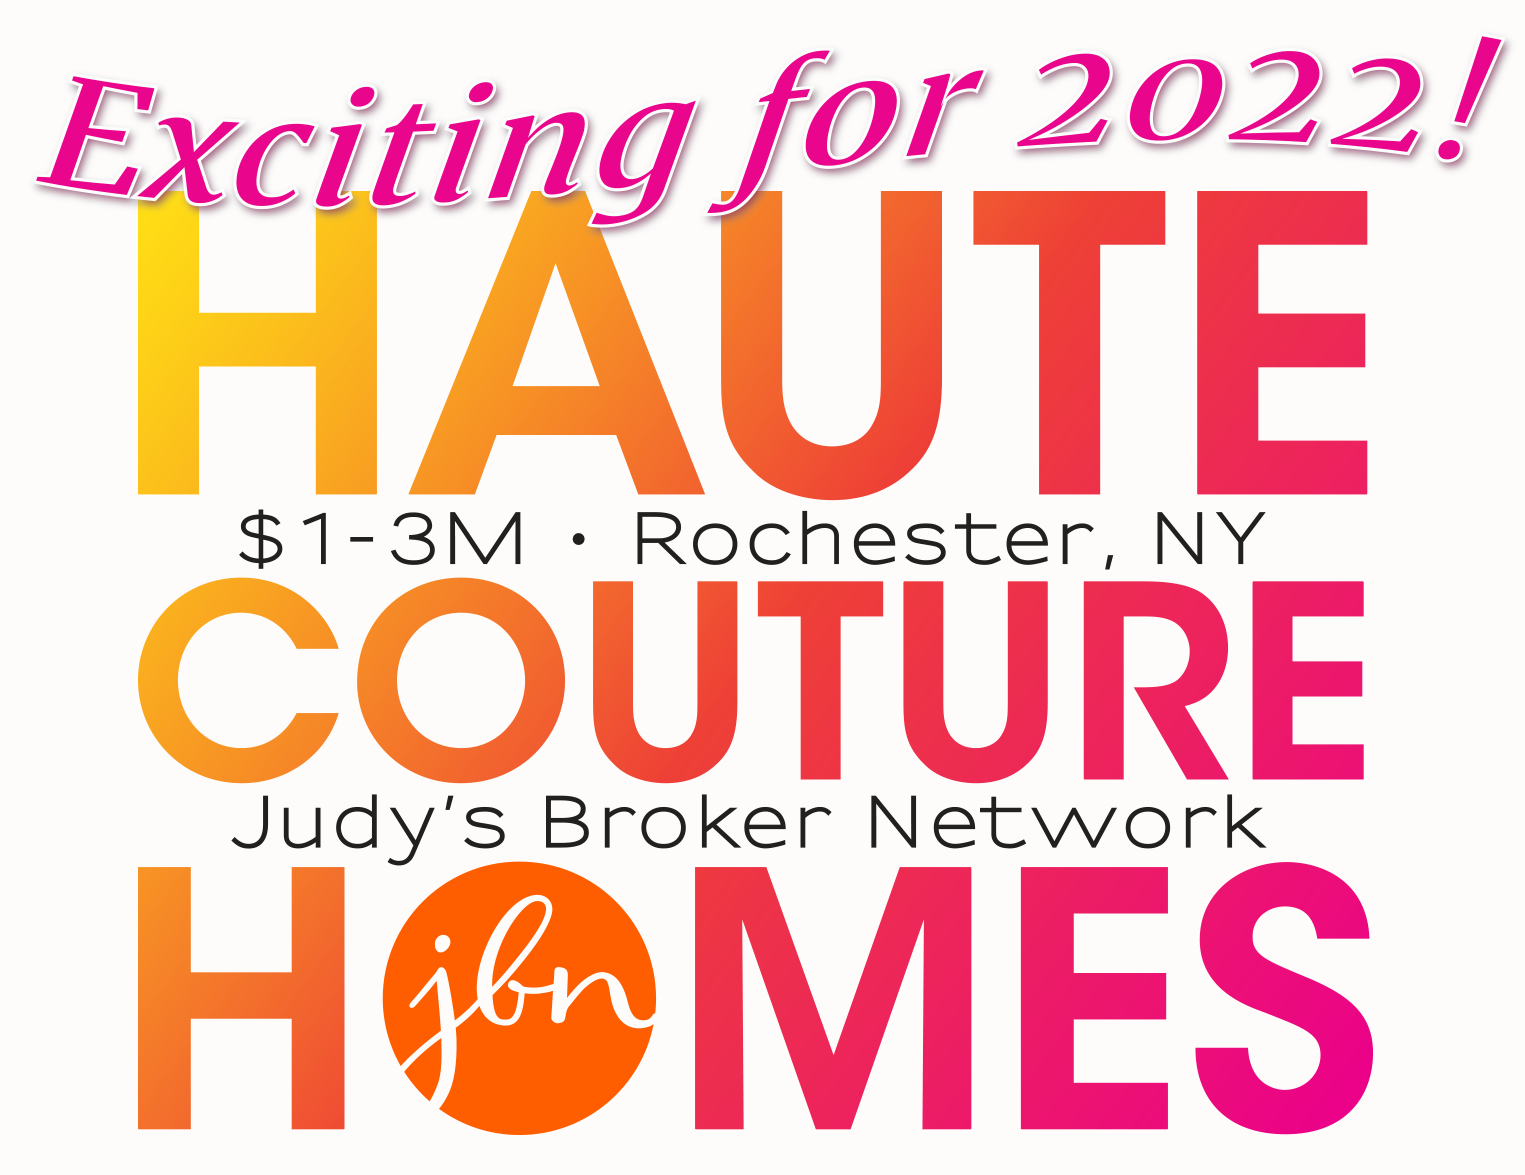 Haute Coutore Homes - Exciting for 2022 graphic